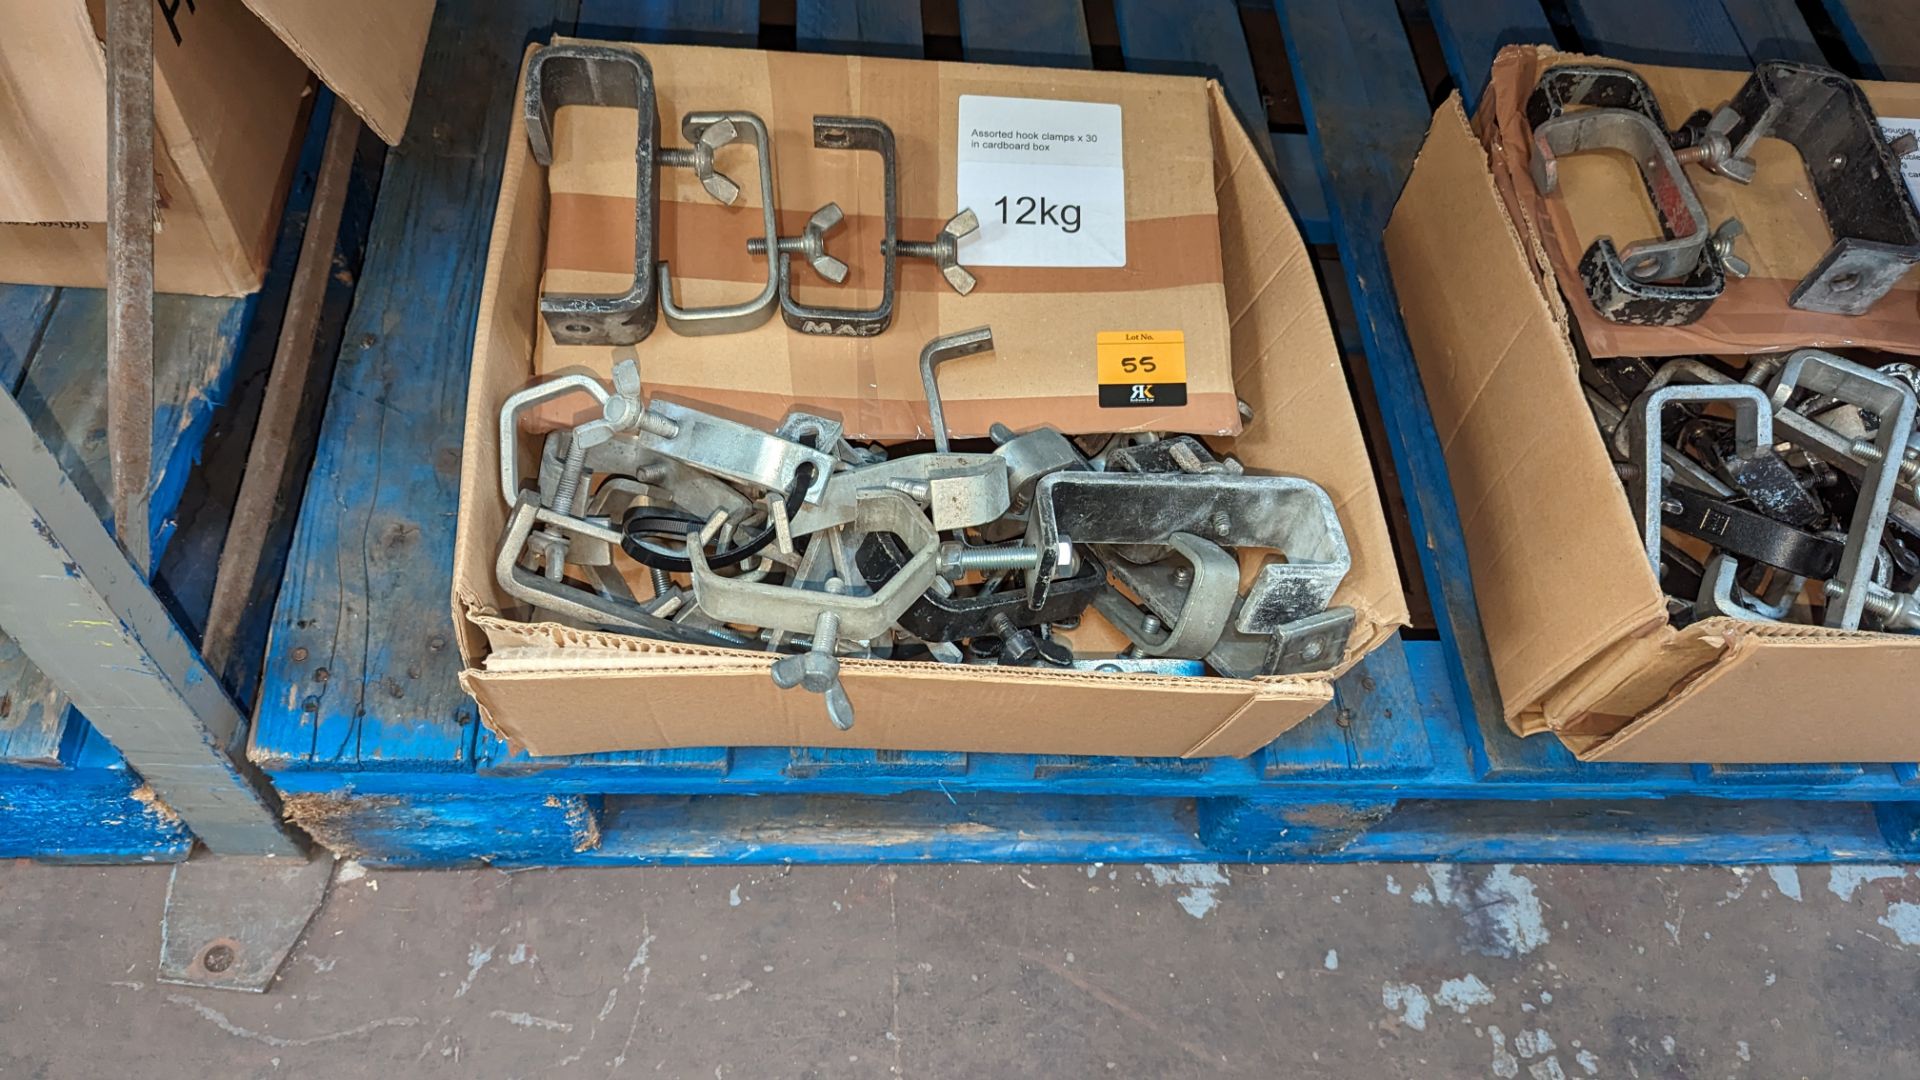 30 off assorted hook clamps in cardboard box. Total lot weight 12kg - Image 2 of 5